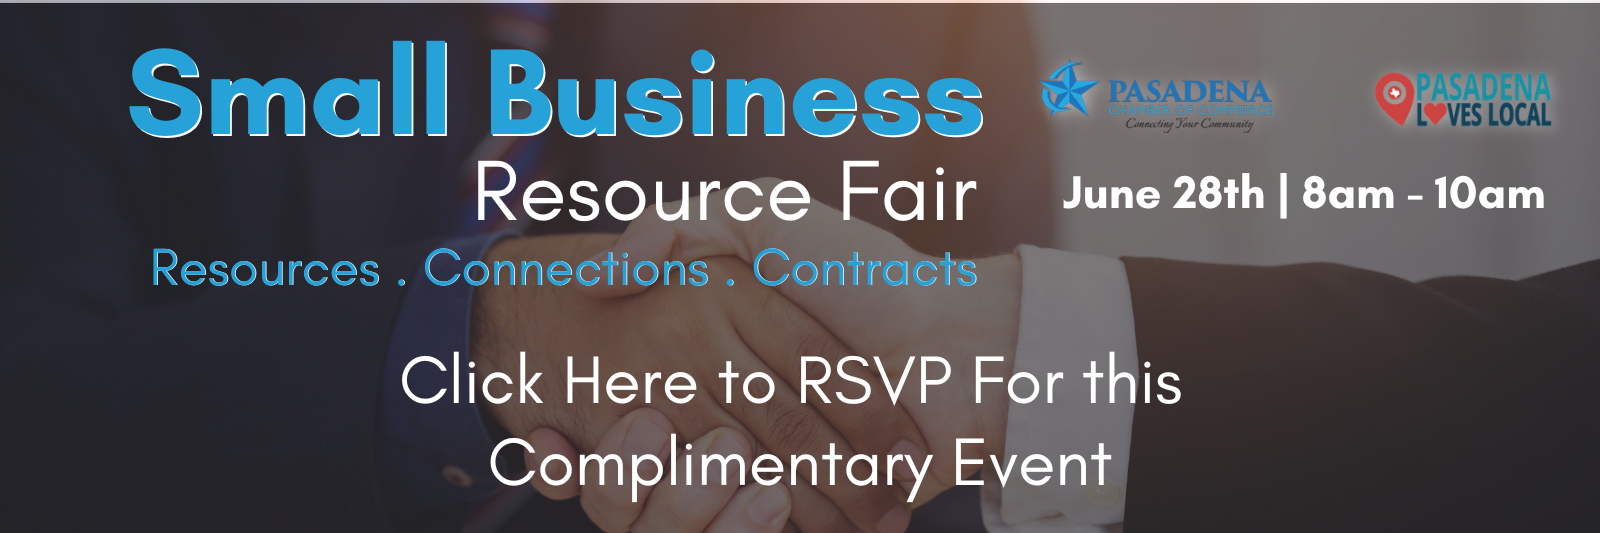 Event Promo Photo For Small Business Resource Fair